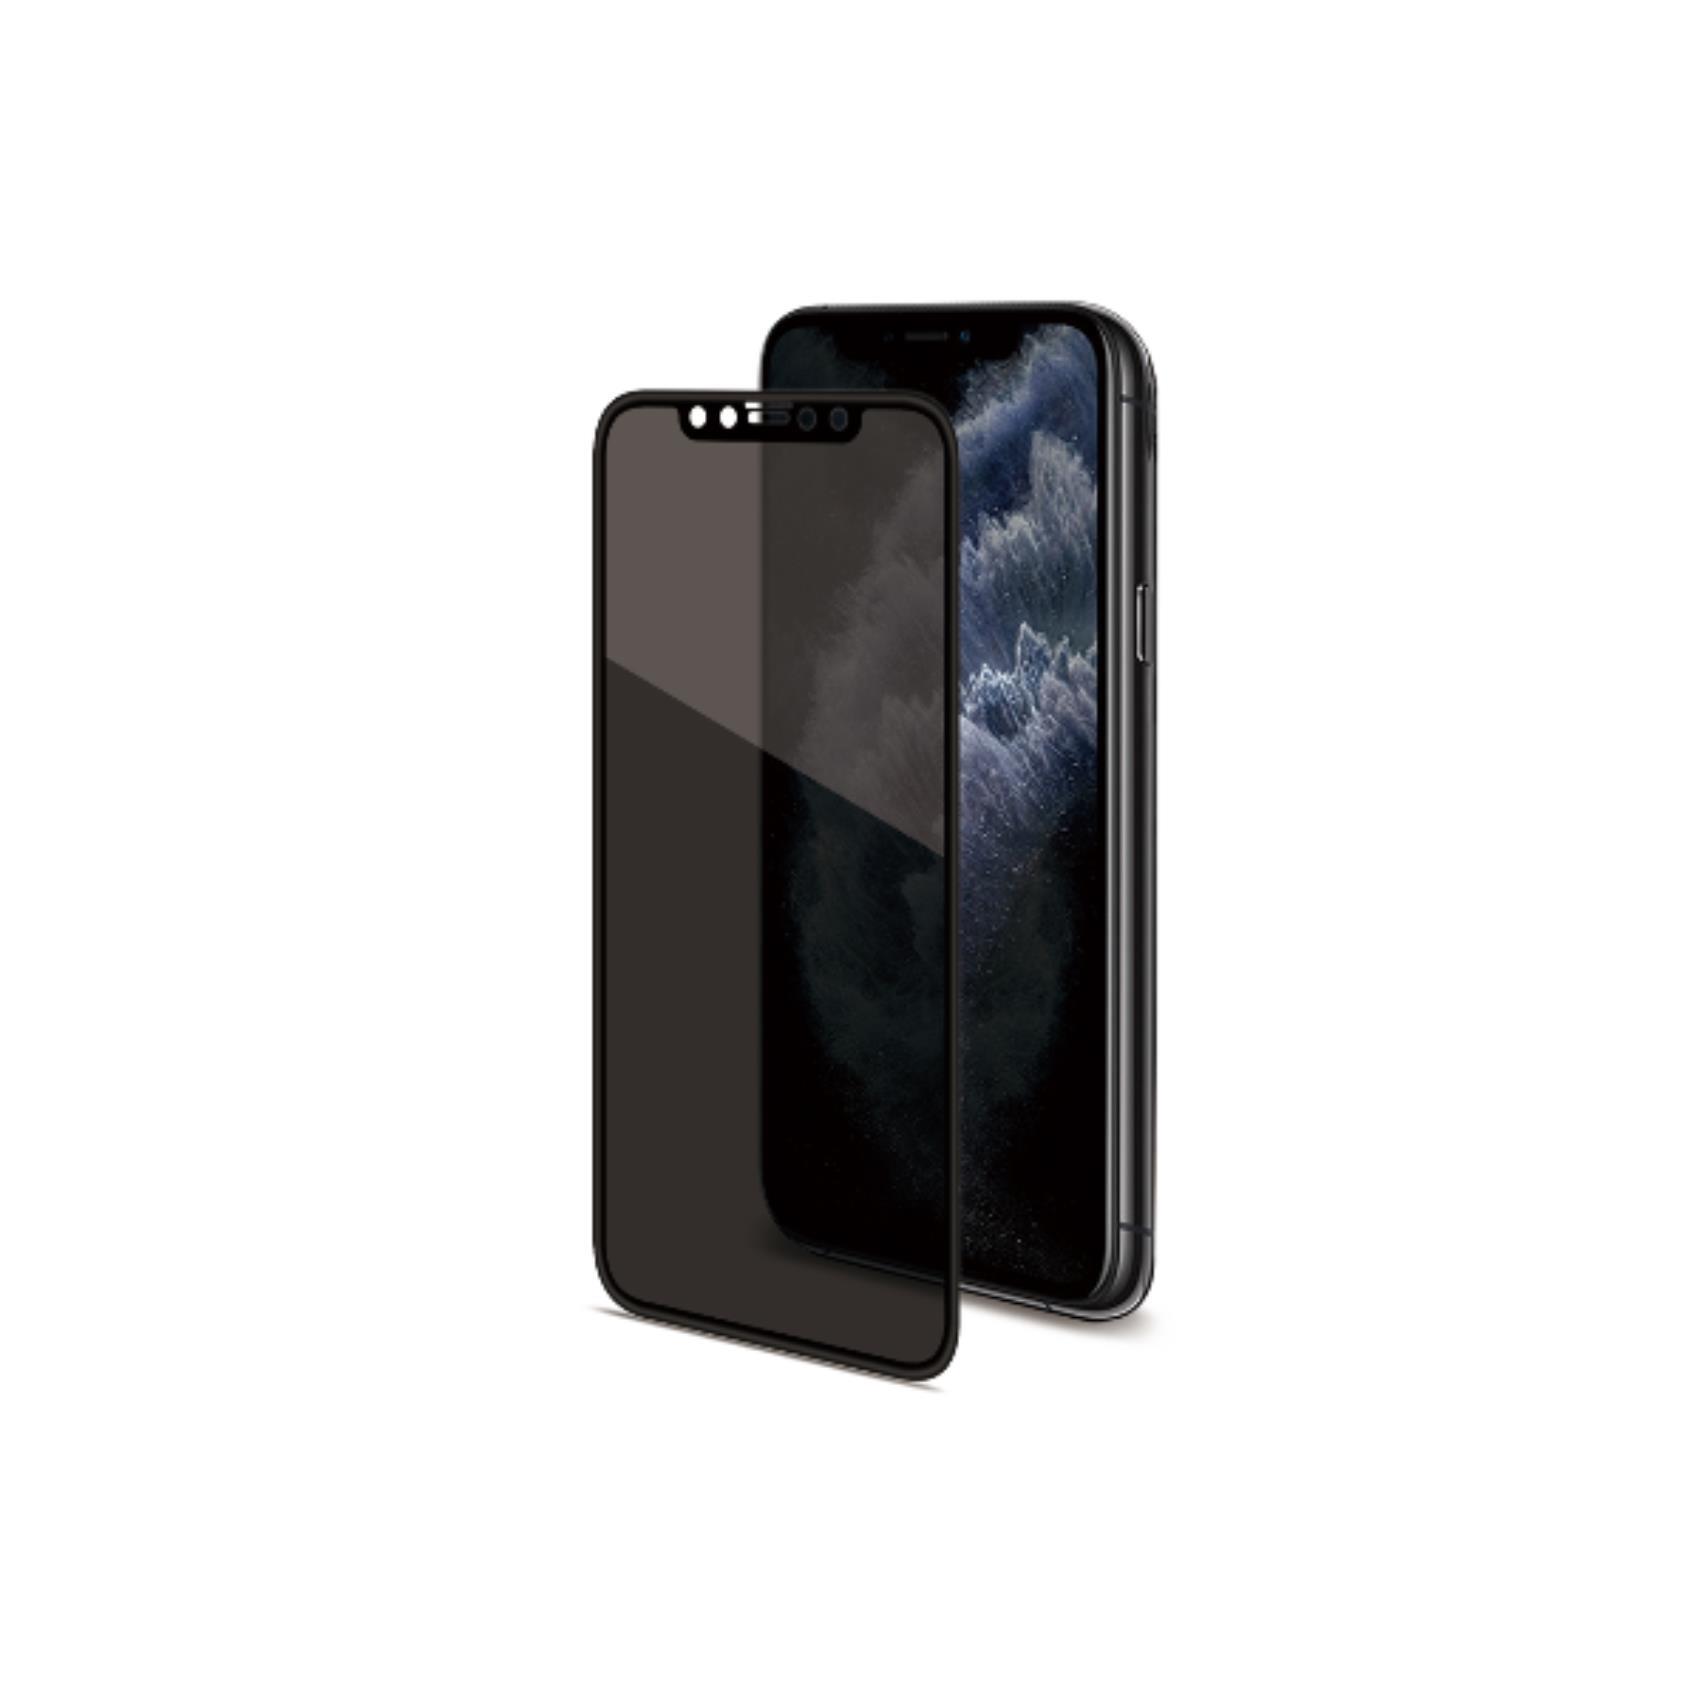 Privacy 3d Iphone 11 Pro Max Black Celly Privacy3d1002bk 8021735754060